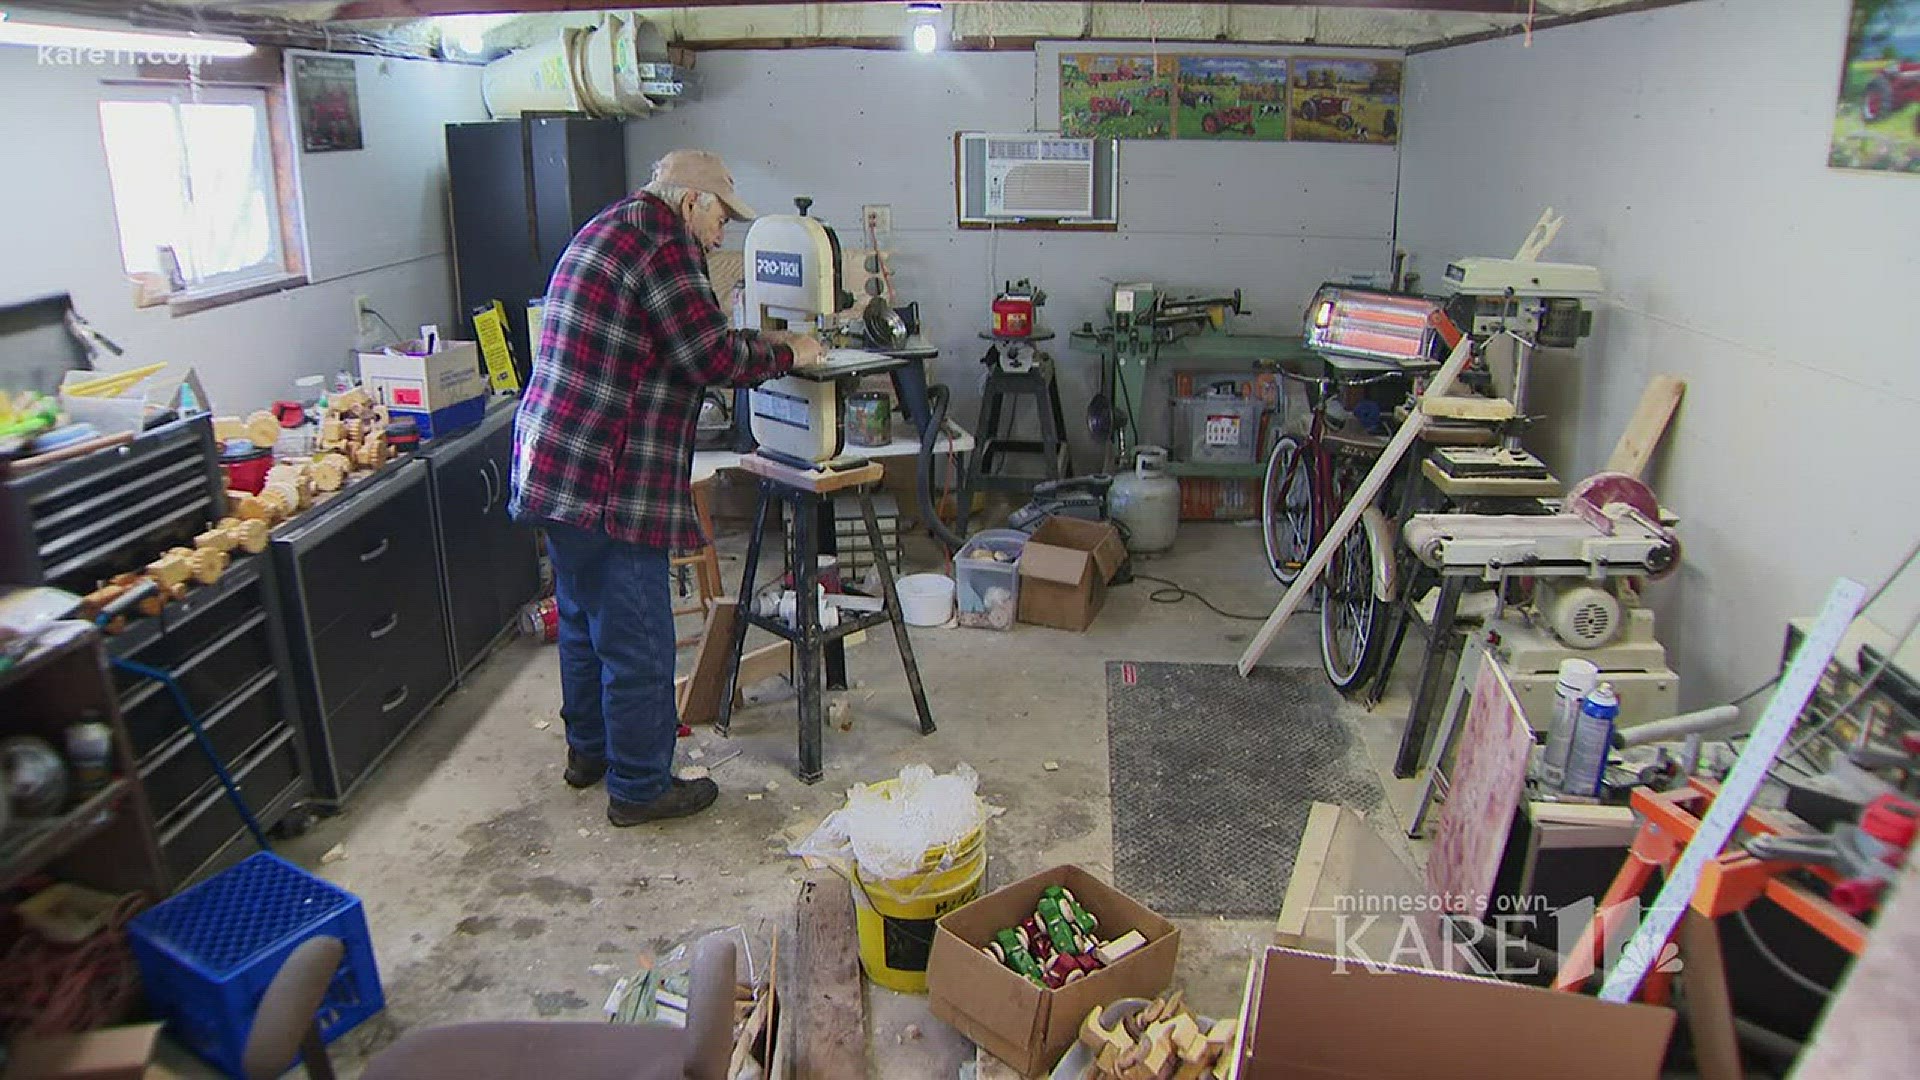 Unable to work on his family farm, John Volz got busy in his garage in town. Nine months later, he's built a thousand wooden toys to give to children. http://kare11.tv/2Bactfl